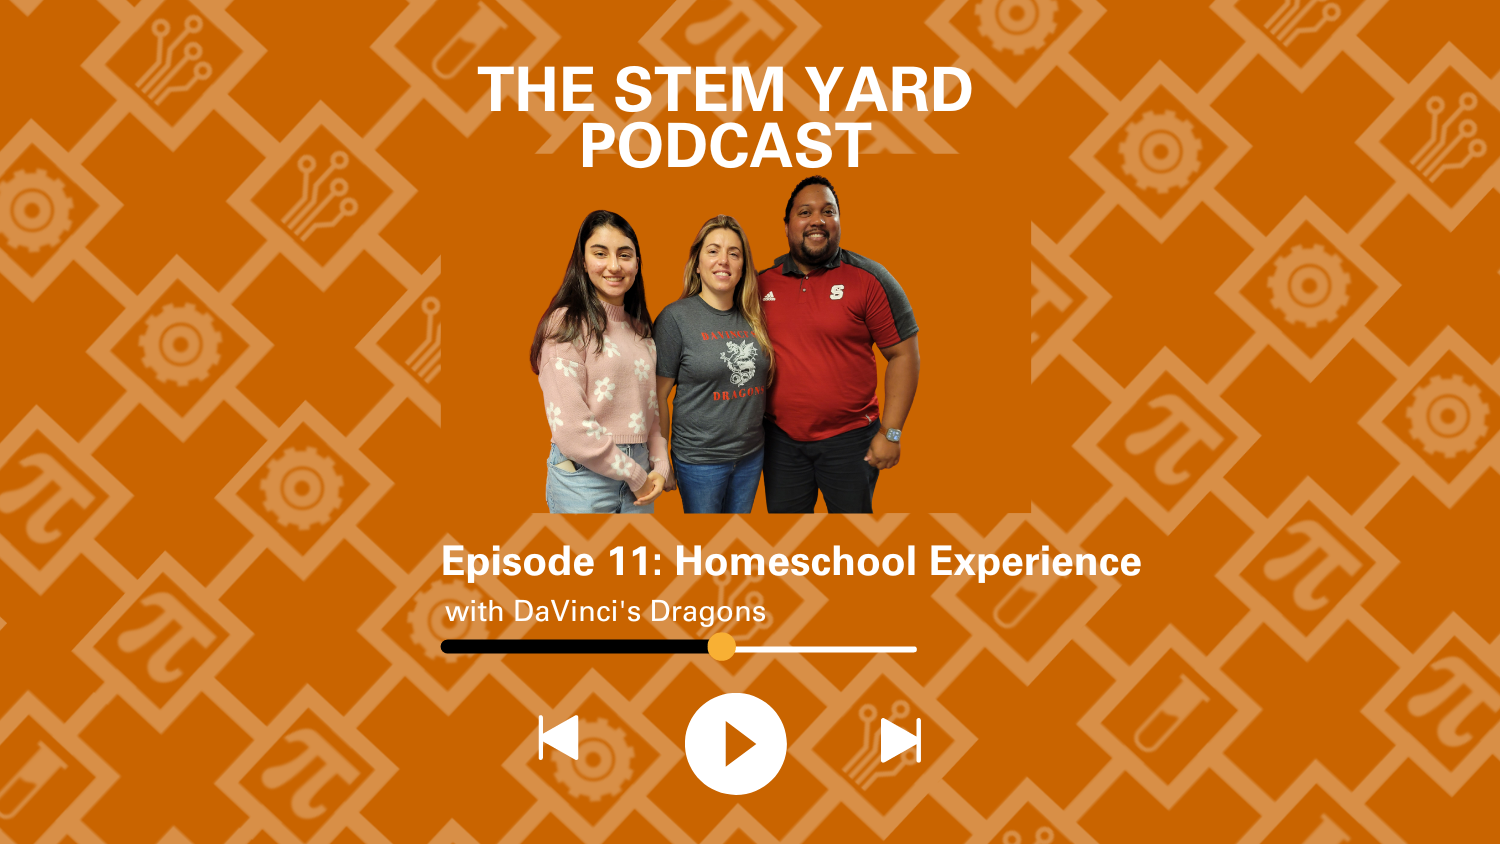 The STEM Yard Episode 11 - Homeschool Experience with DaVinci's Dragons